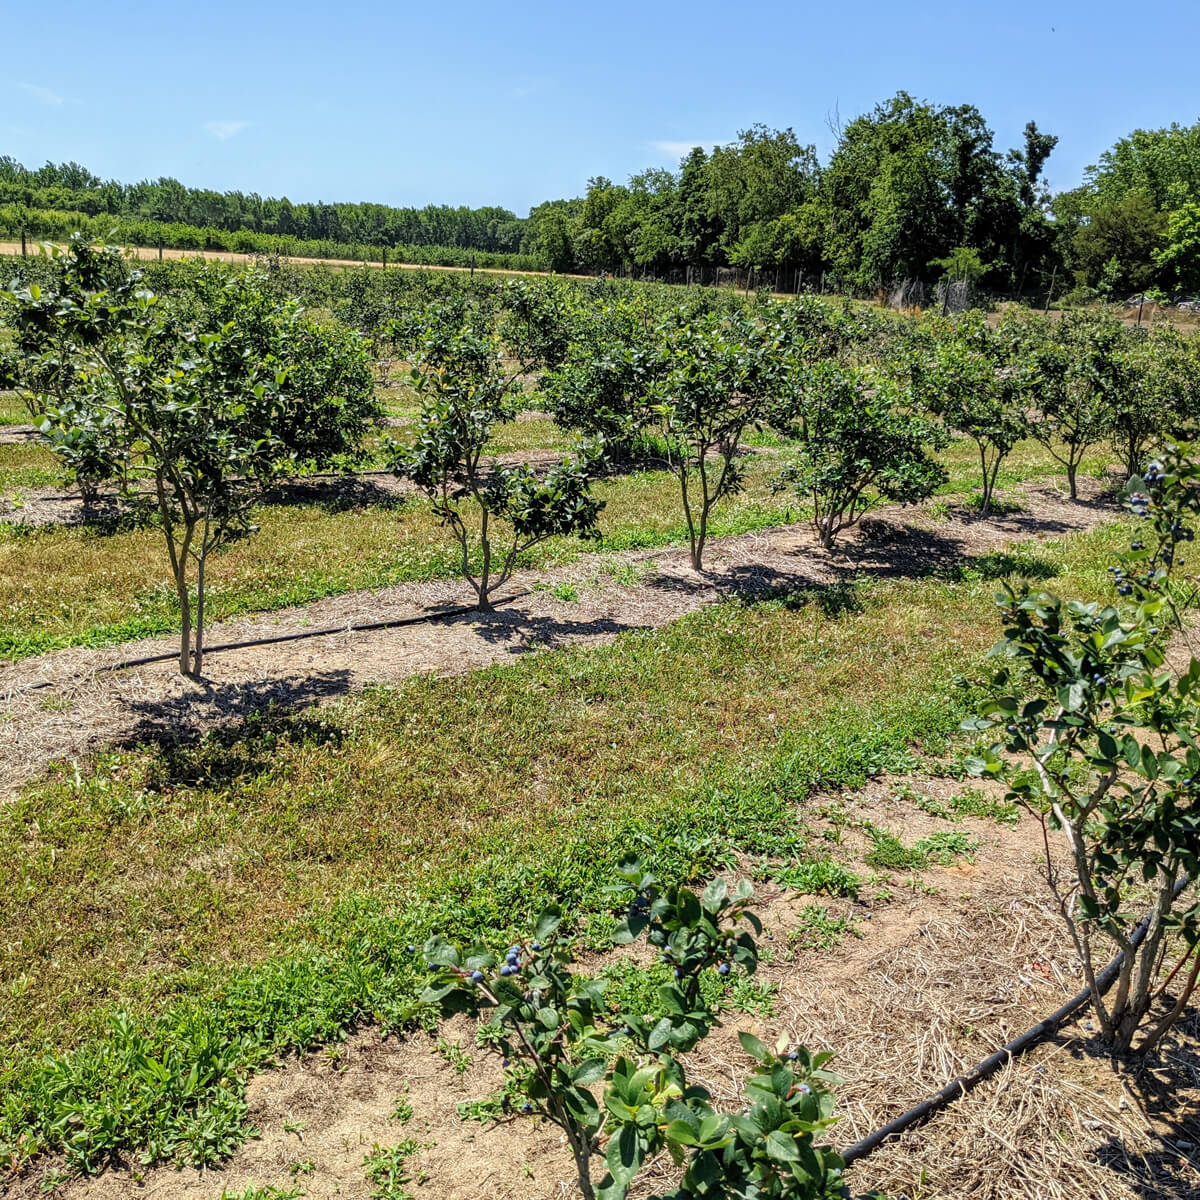 Blueberry field at Stiles Farm in Middle Township NJ - one of my happy places!